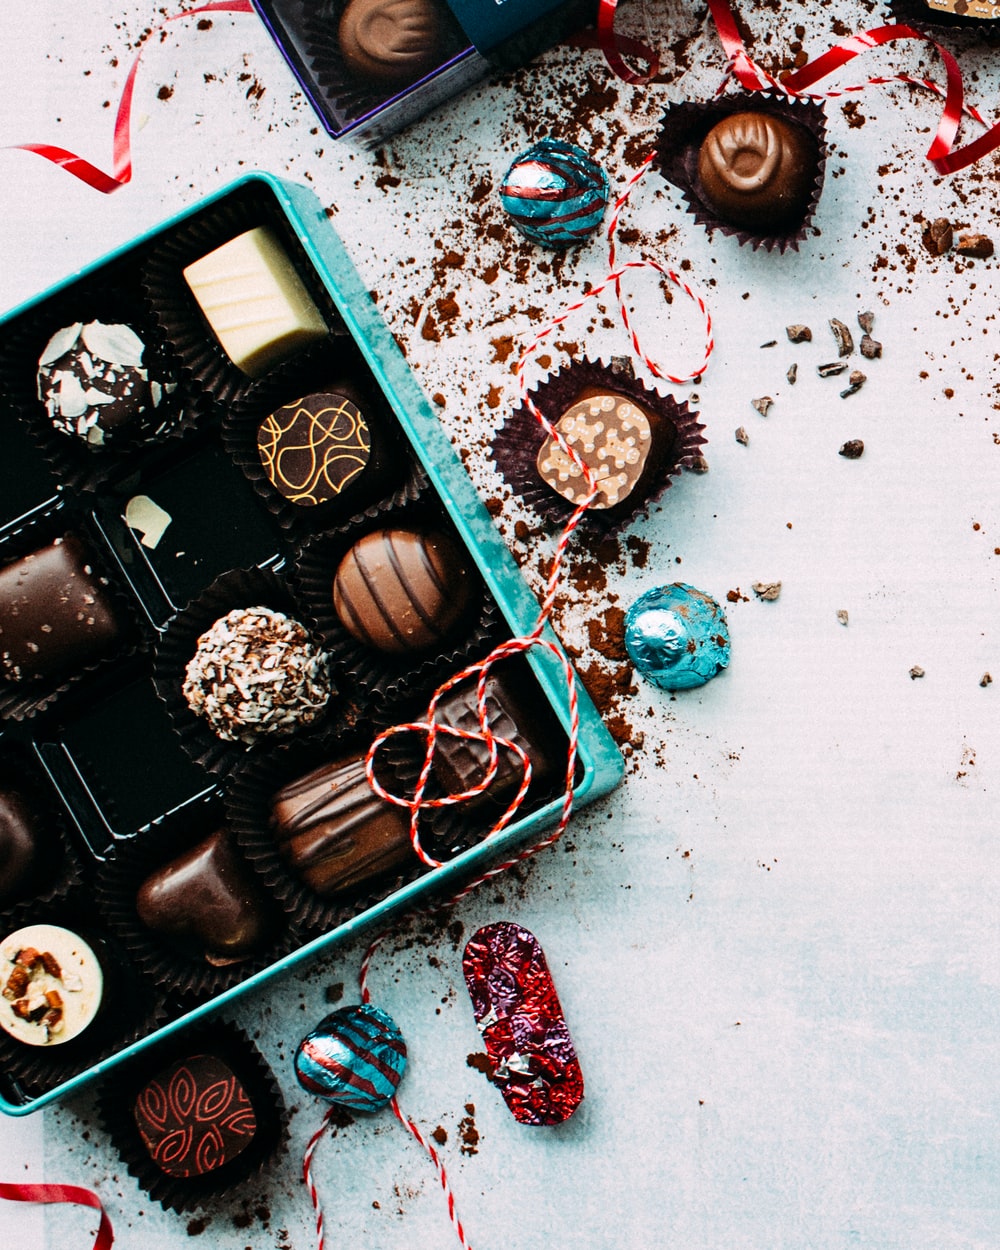 Chocolate Box Picture. Download Free Image